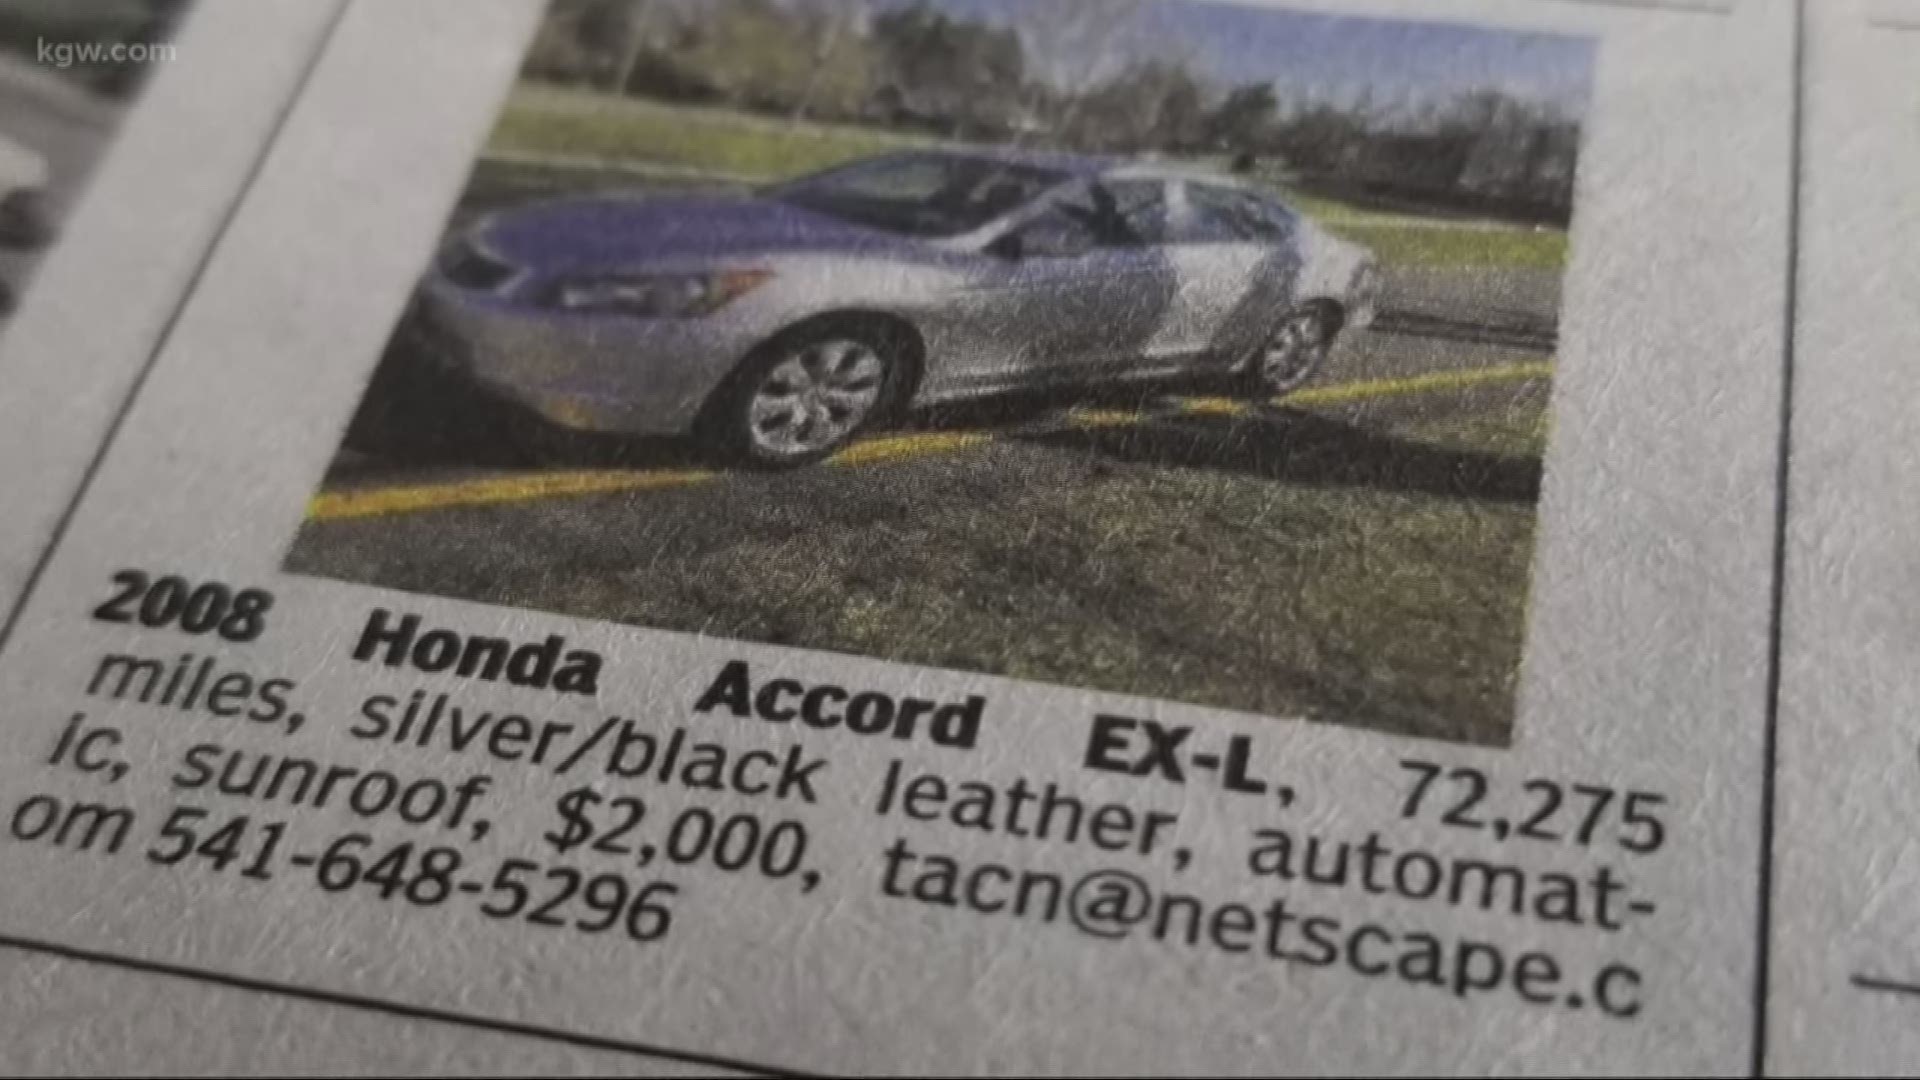 Watch out for this car scam in newspaper classified ads.